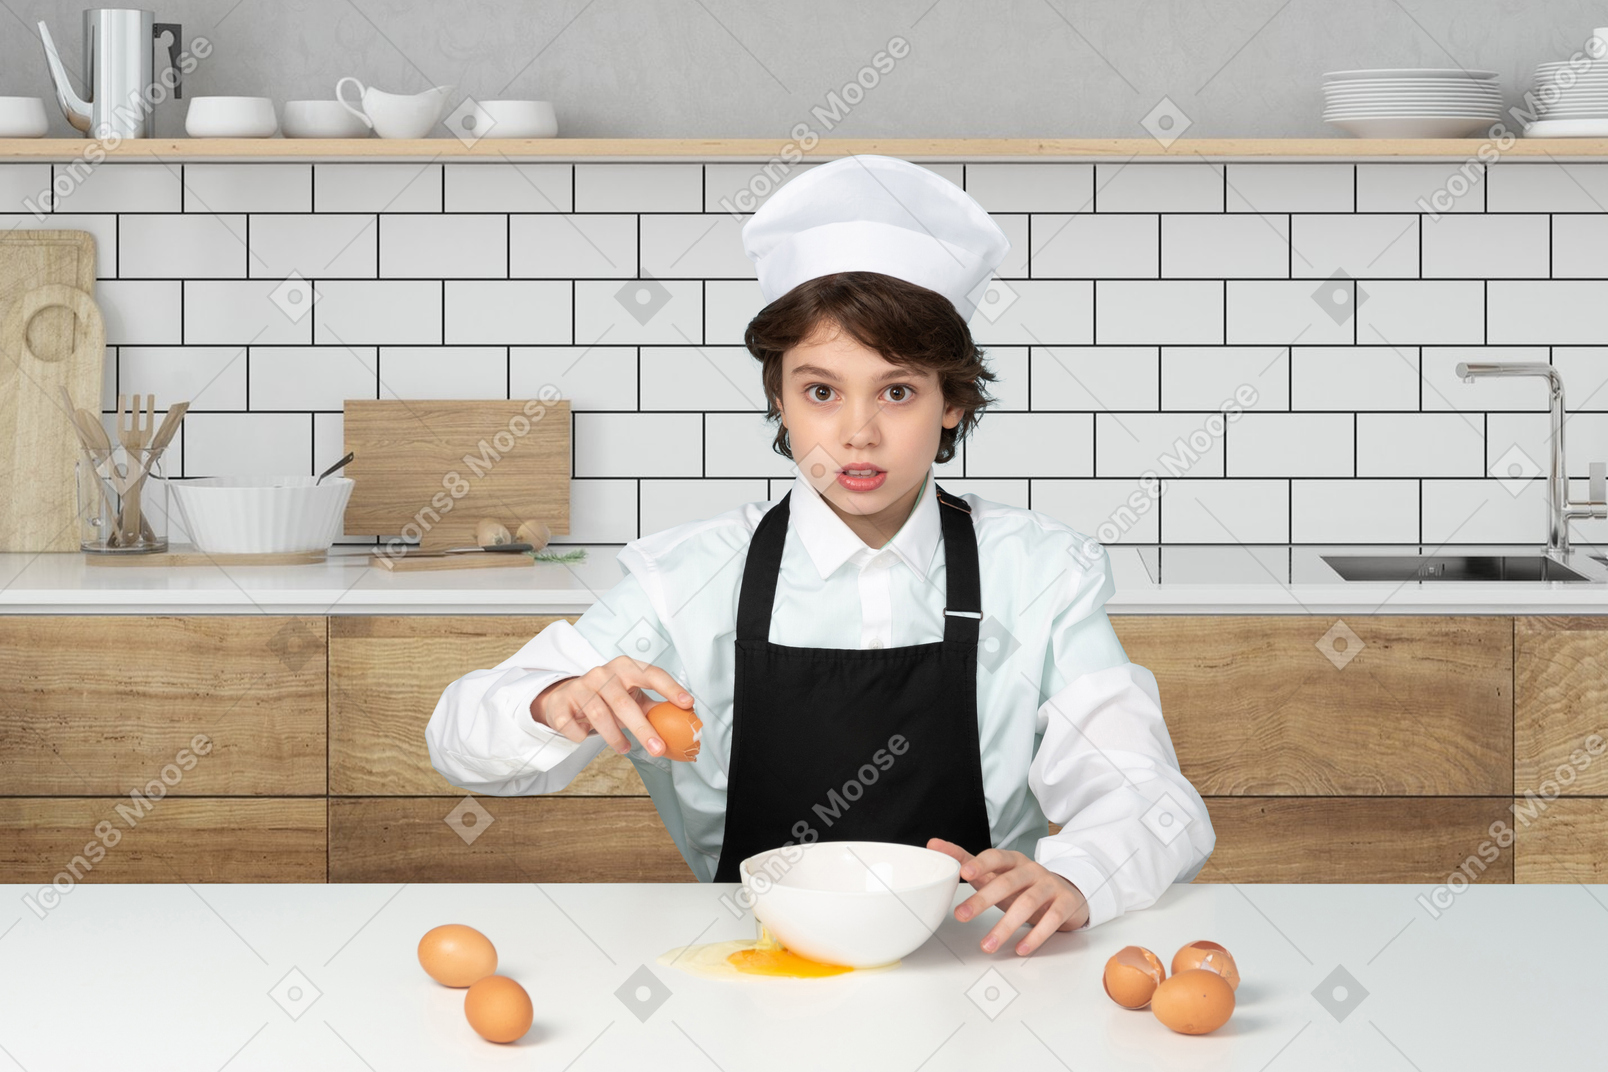 Portrait of a young man cooking in the kitchen